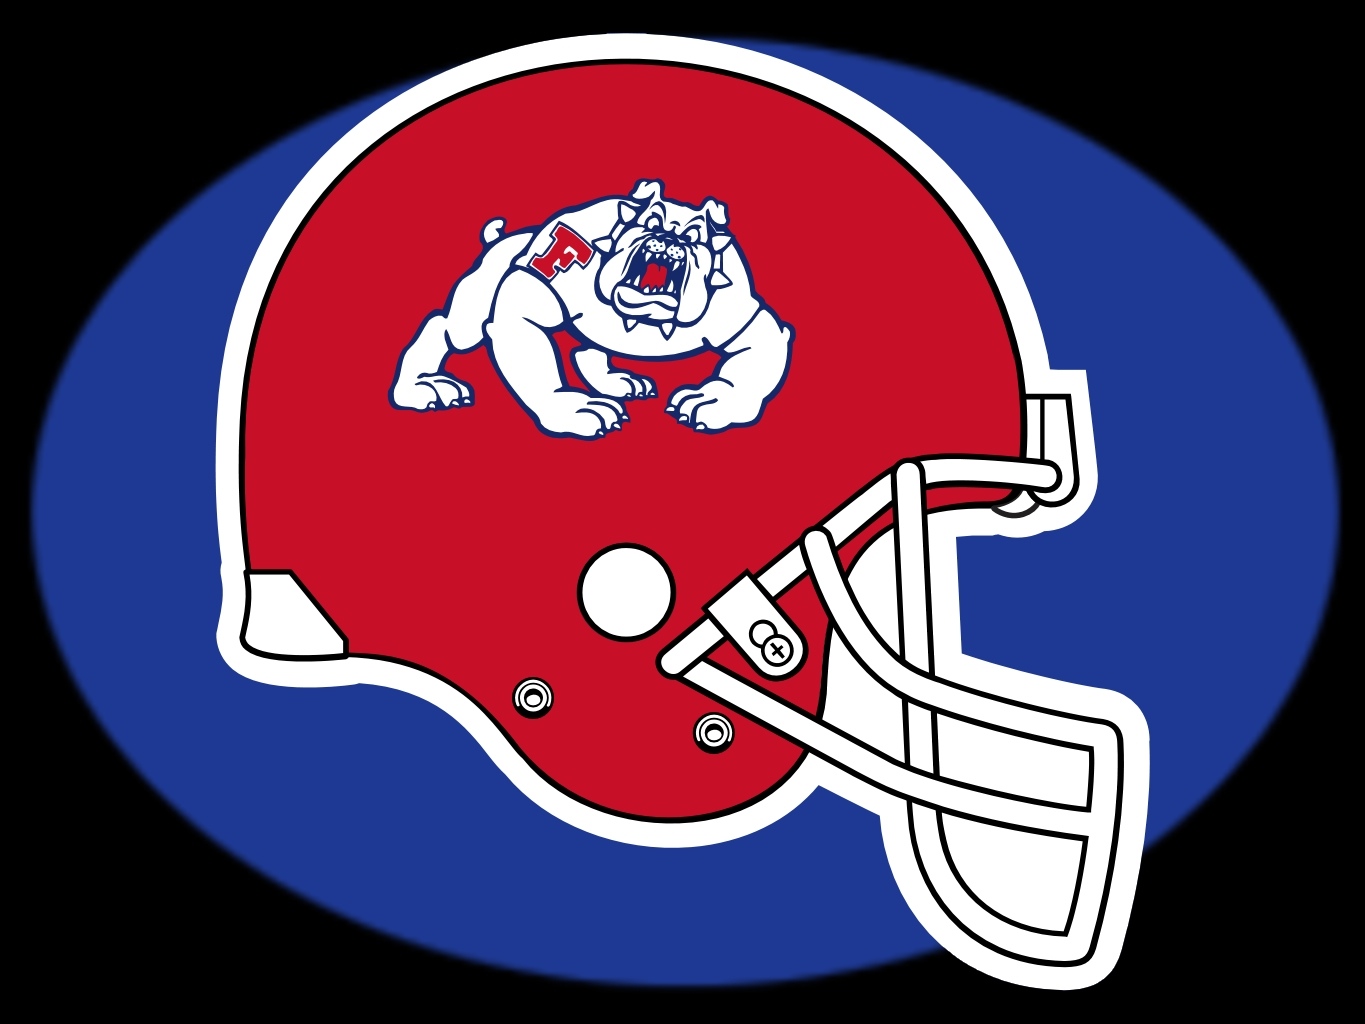 Fresno State Bulldogs Vector - Bing images